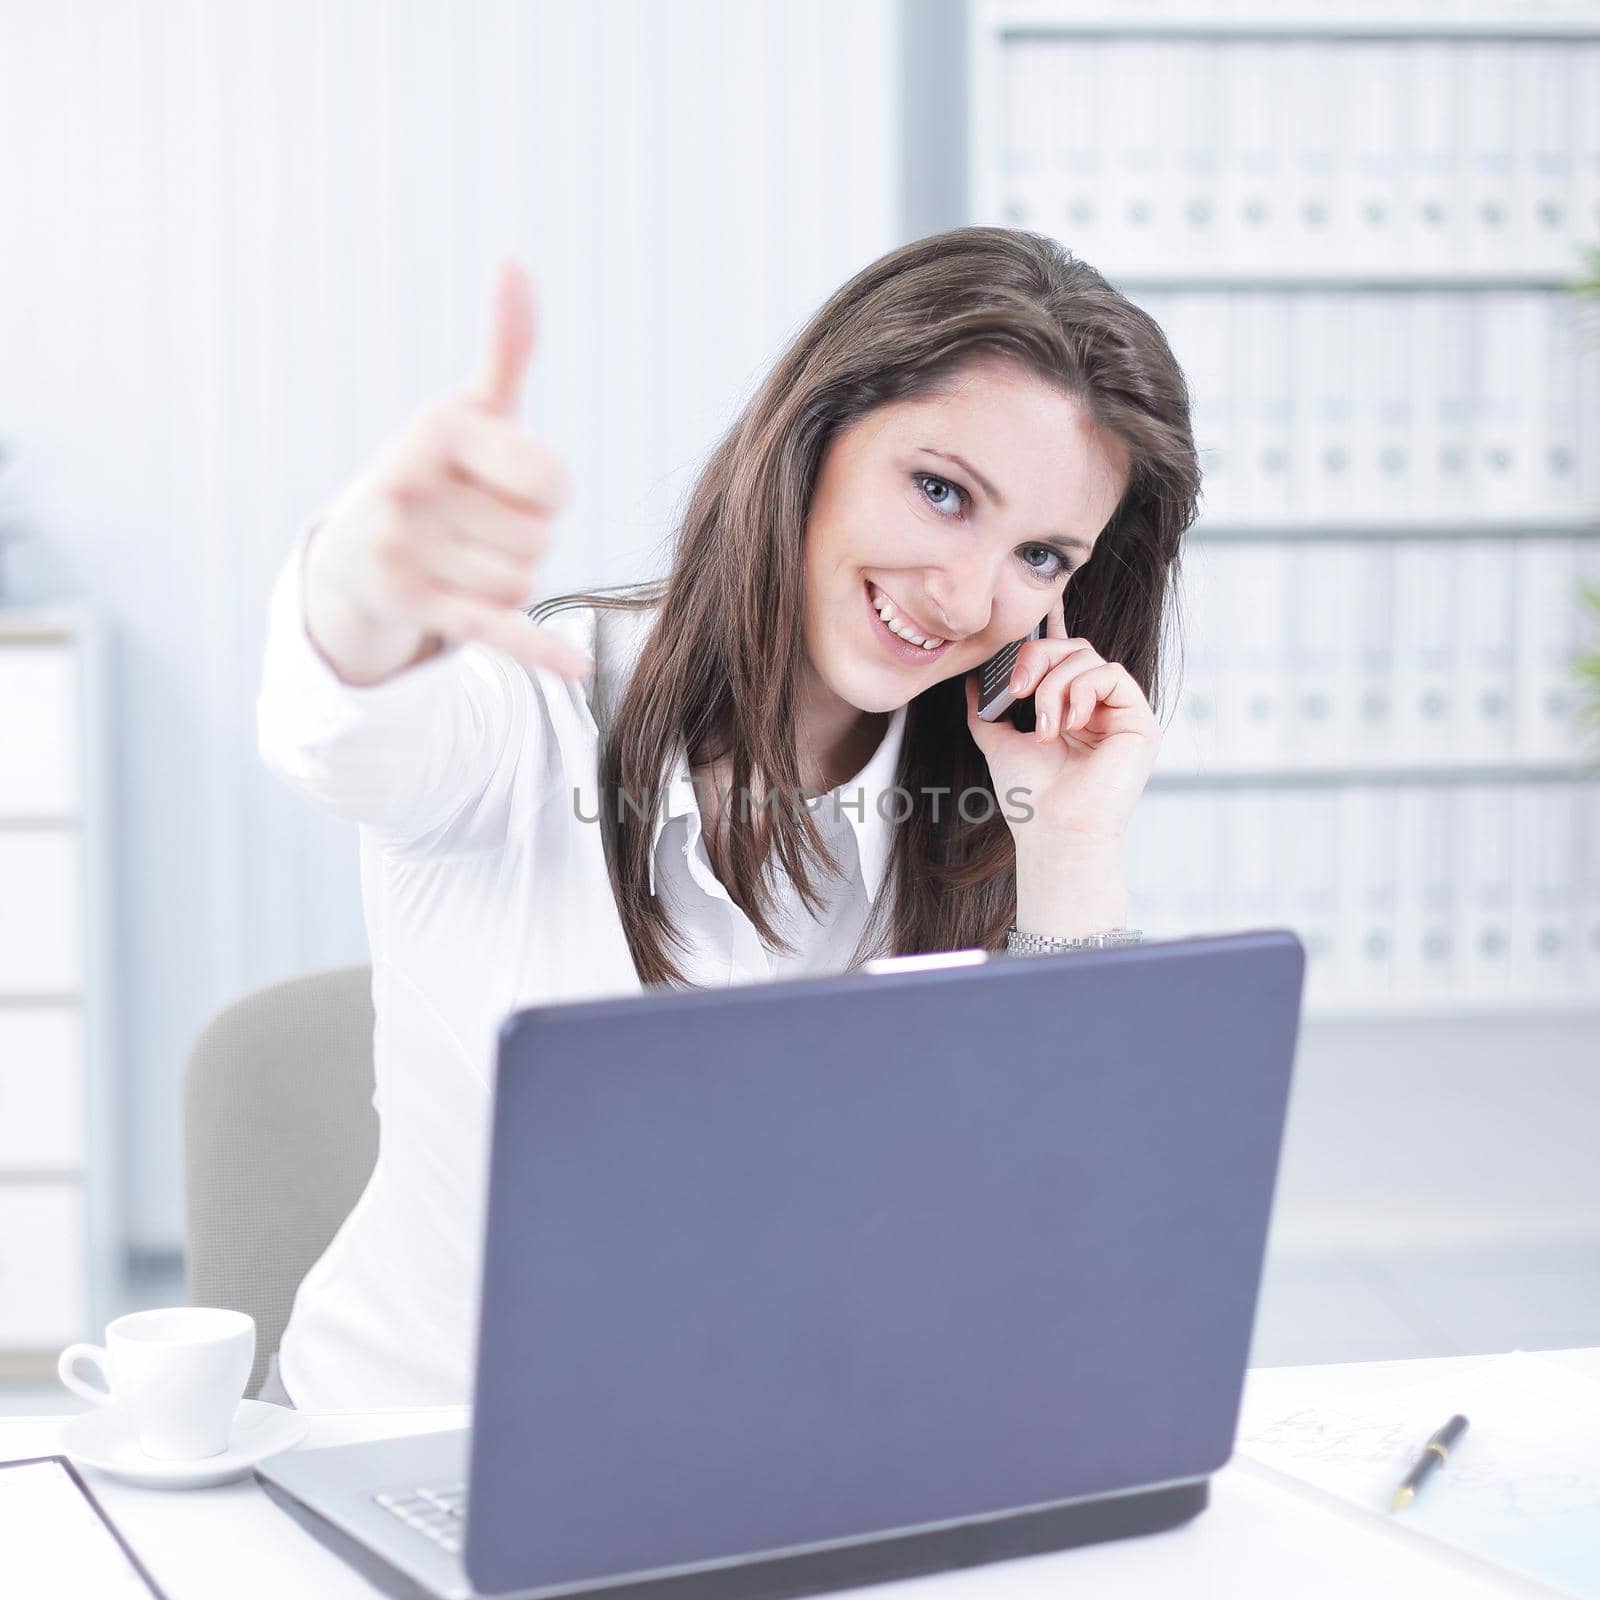 successful business woman showing thumb up in the workplace.photo with copy space